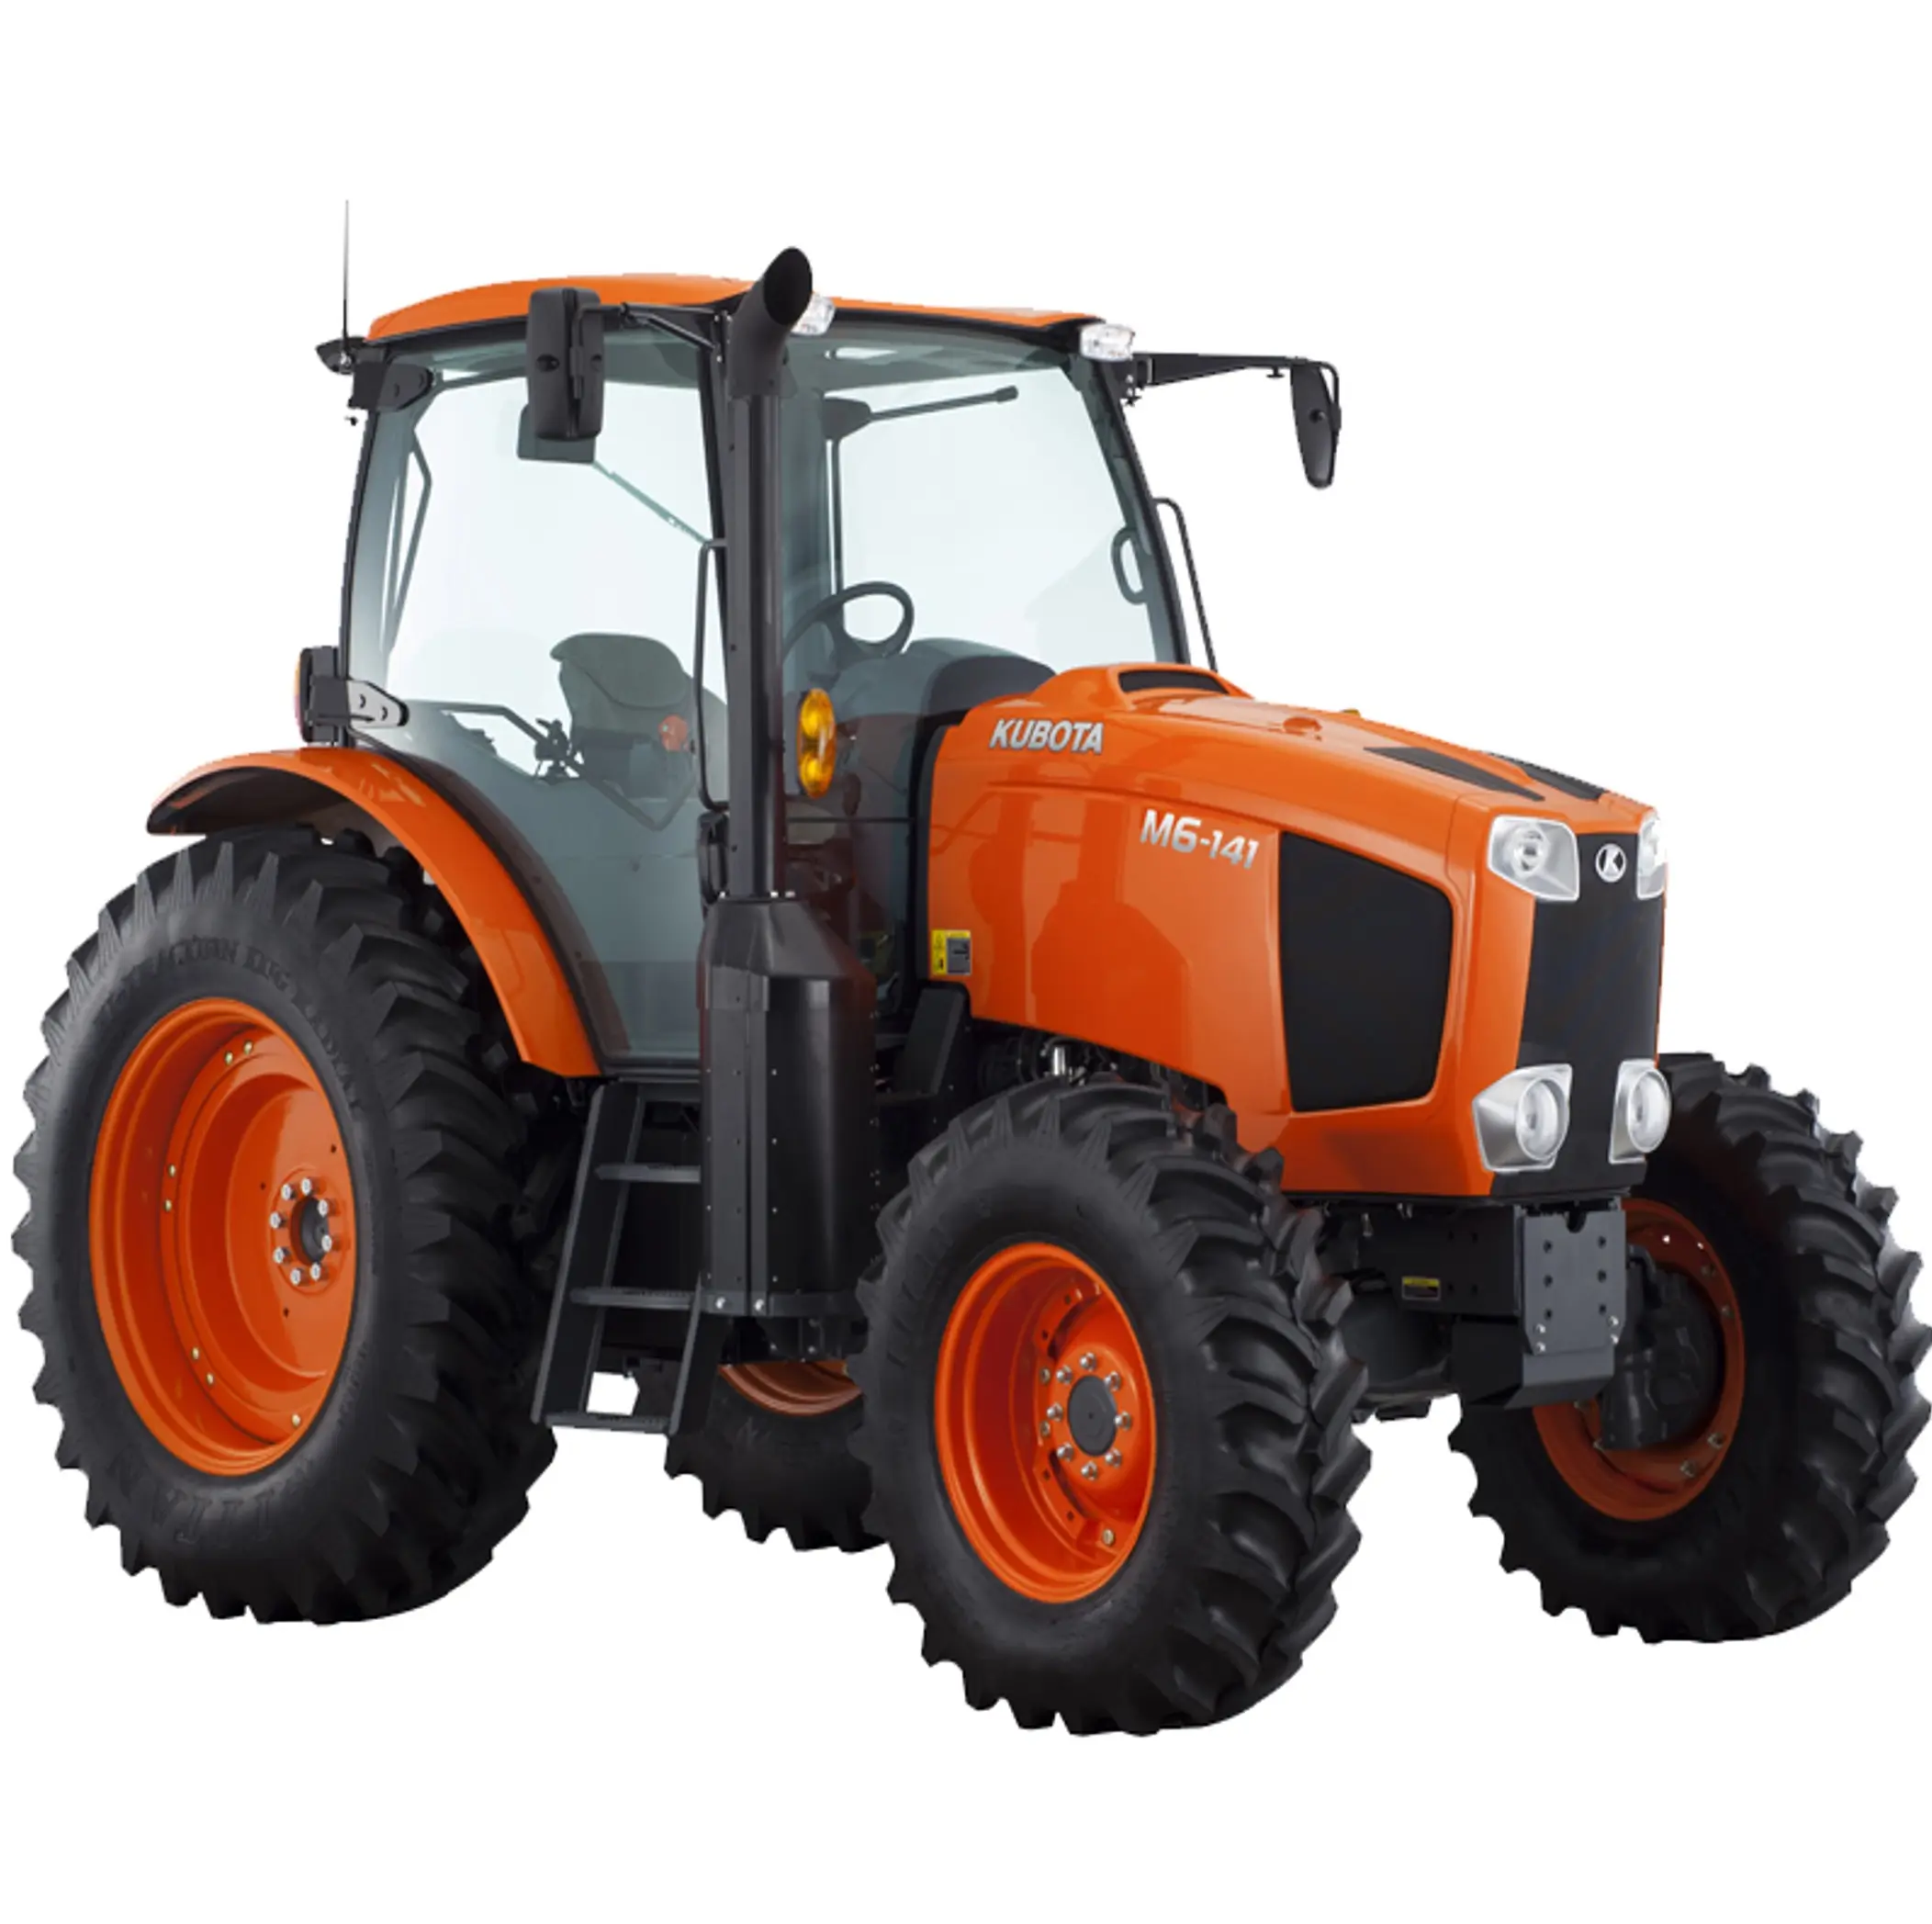 Good Deal Fairly Used Agricultural Machinery 2017 Kubota Tractors M6-141 Red Color For Sale